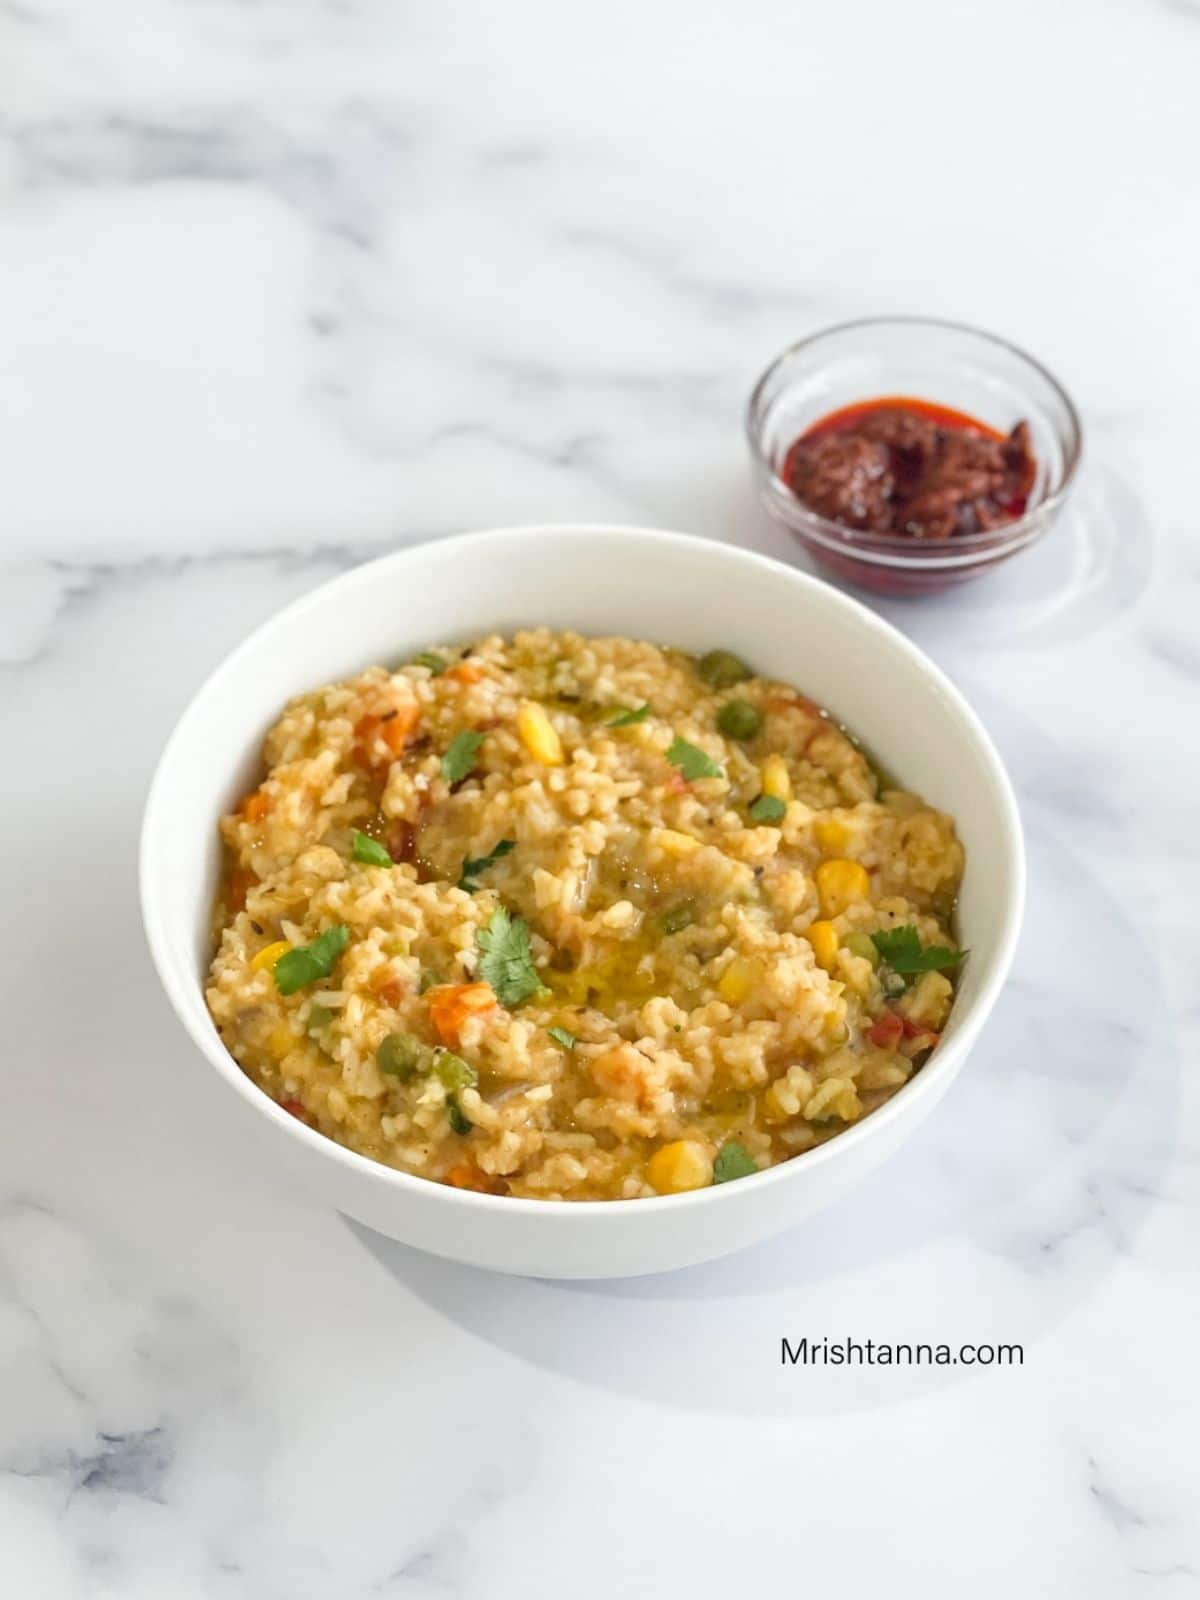 A bowl of masala khichdi is on the table along with tomato pickle